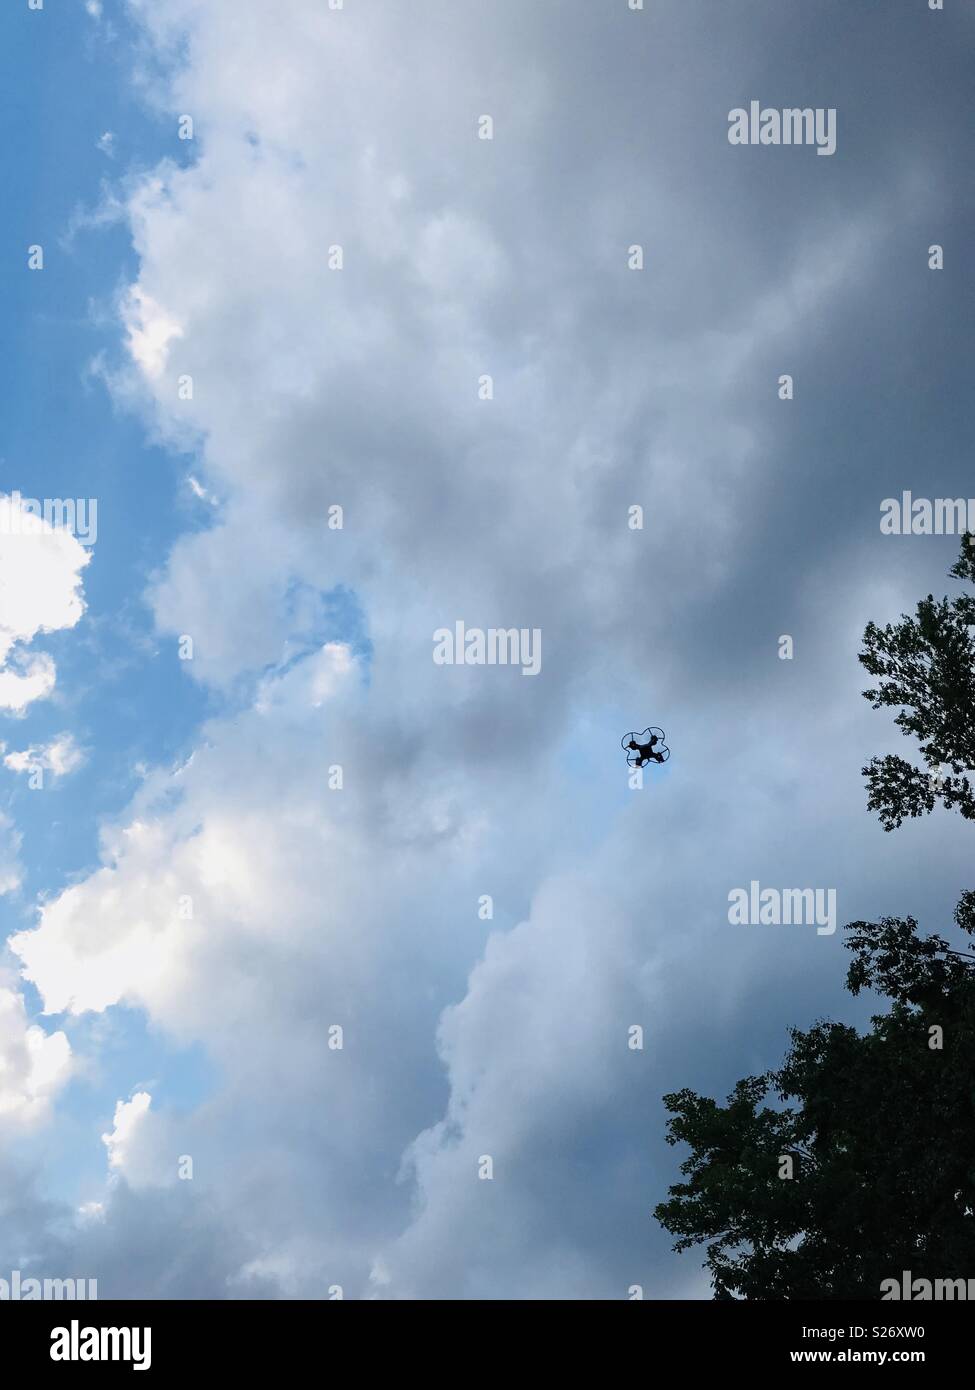 Flying a small drone Stock Photo